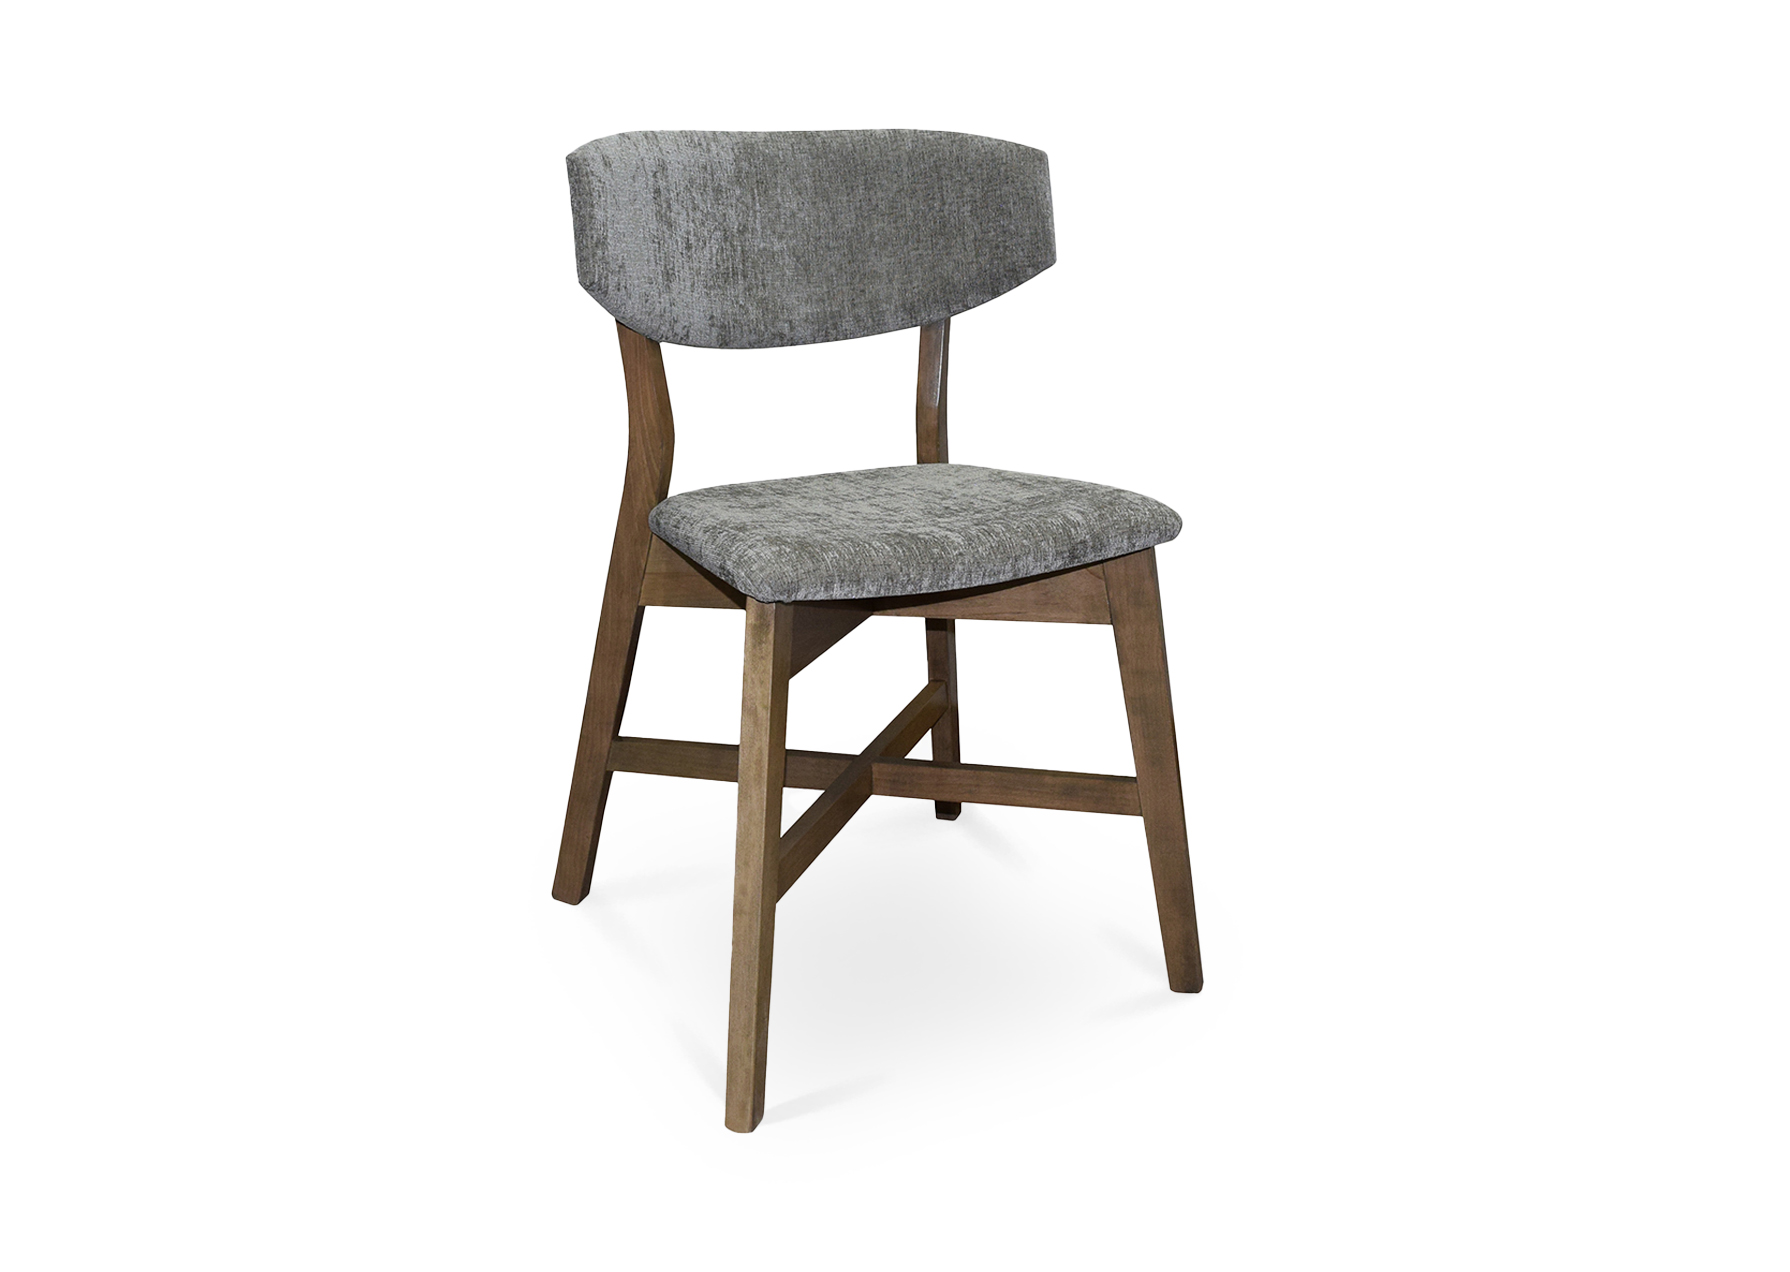 Noodle Padded Chair - nailheads - Pavar